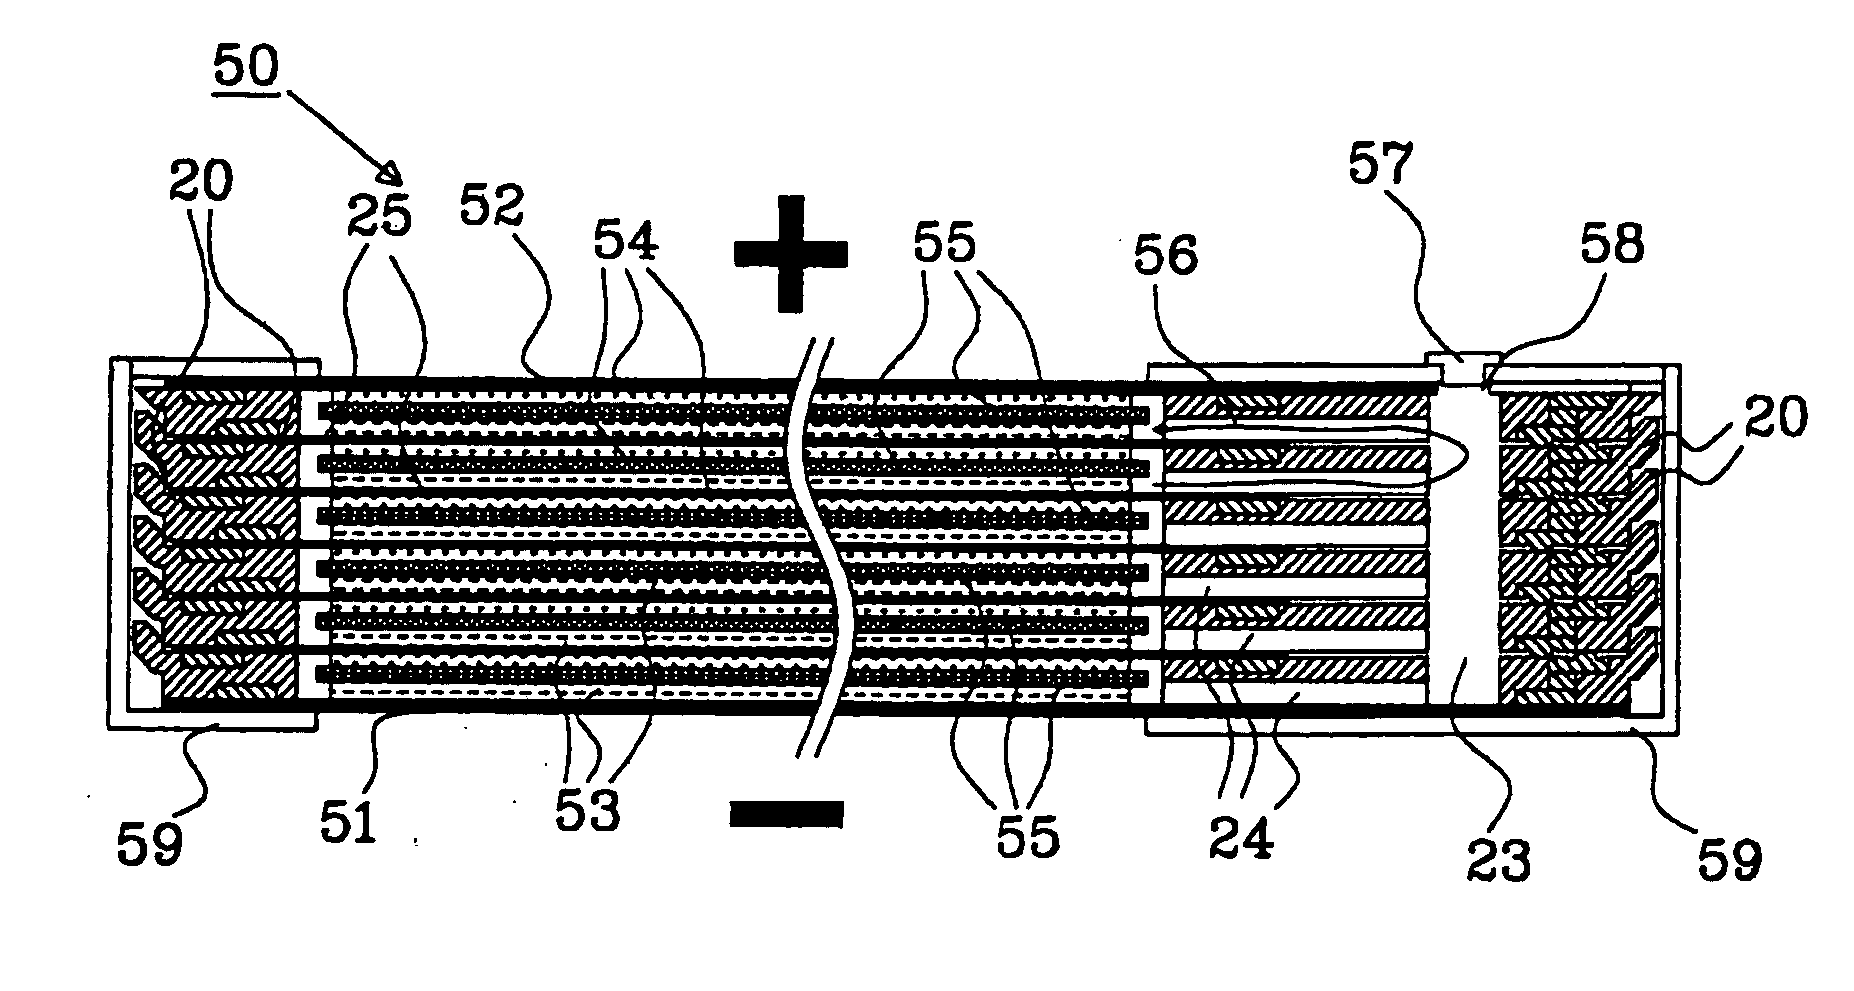 Gasket, a bipolar battery and a method for manufacturing a gasket